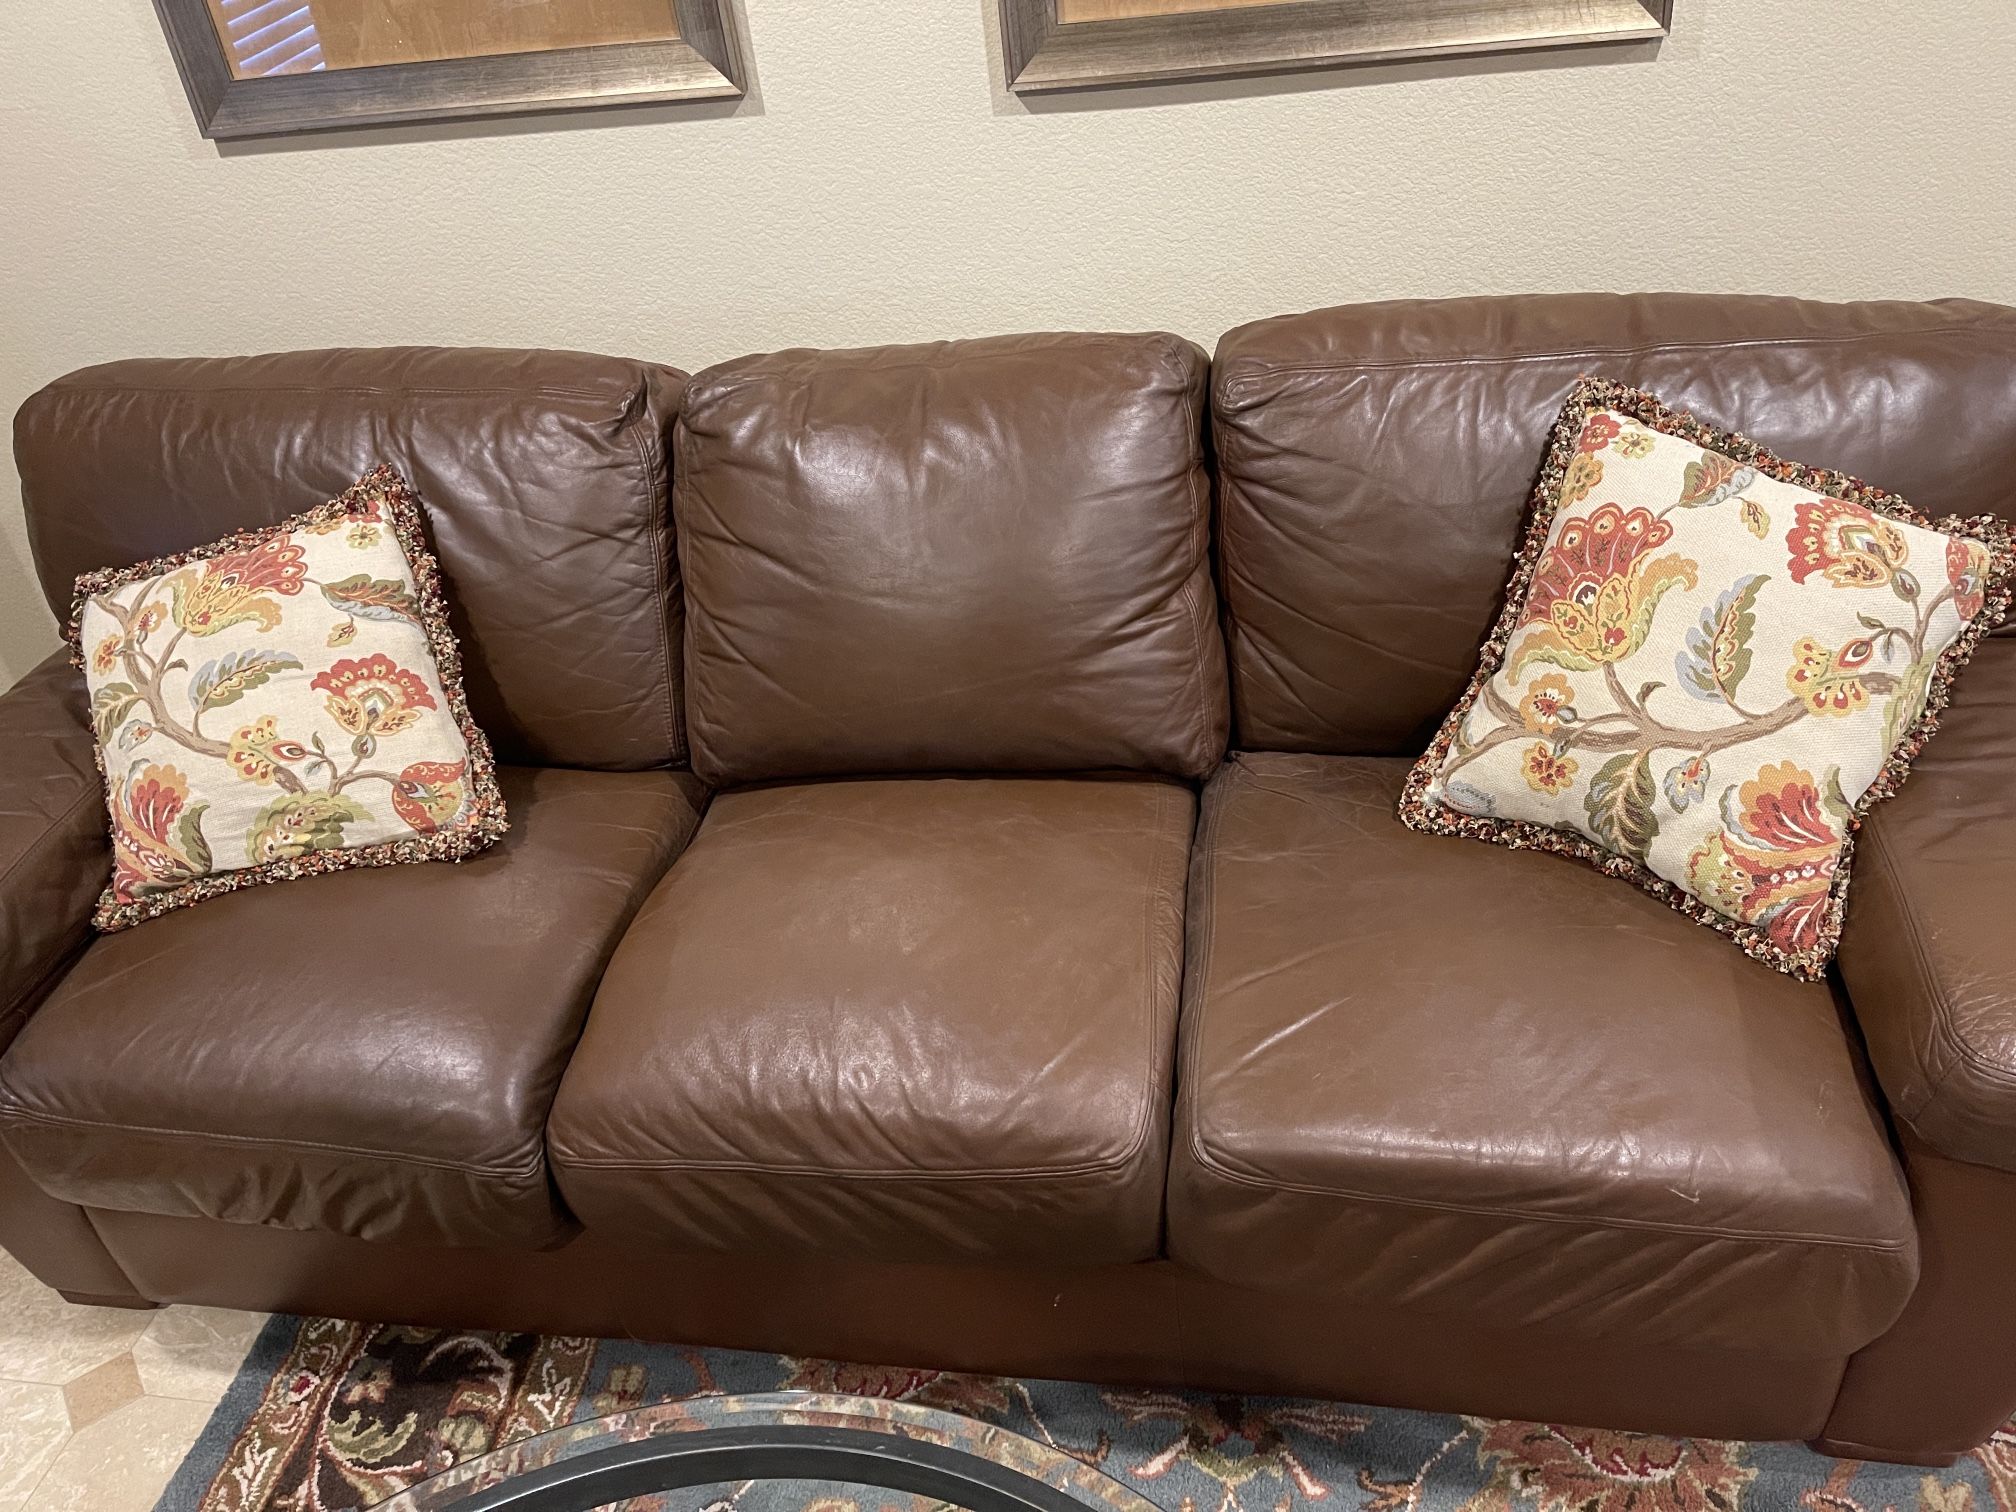 Leather Couch And Chair - Arizona Leather Prescott